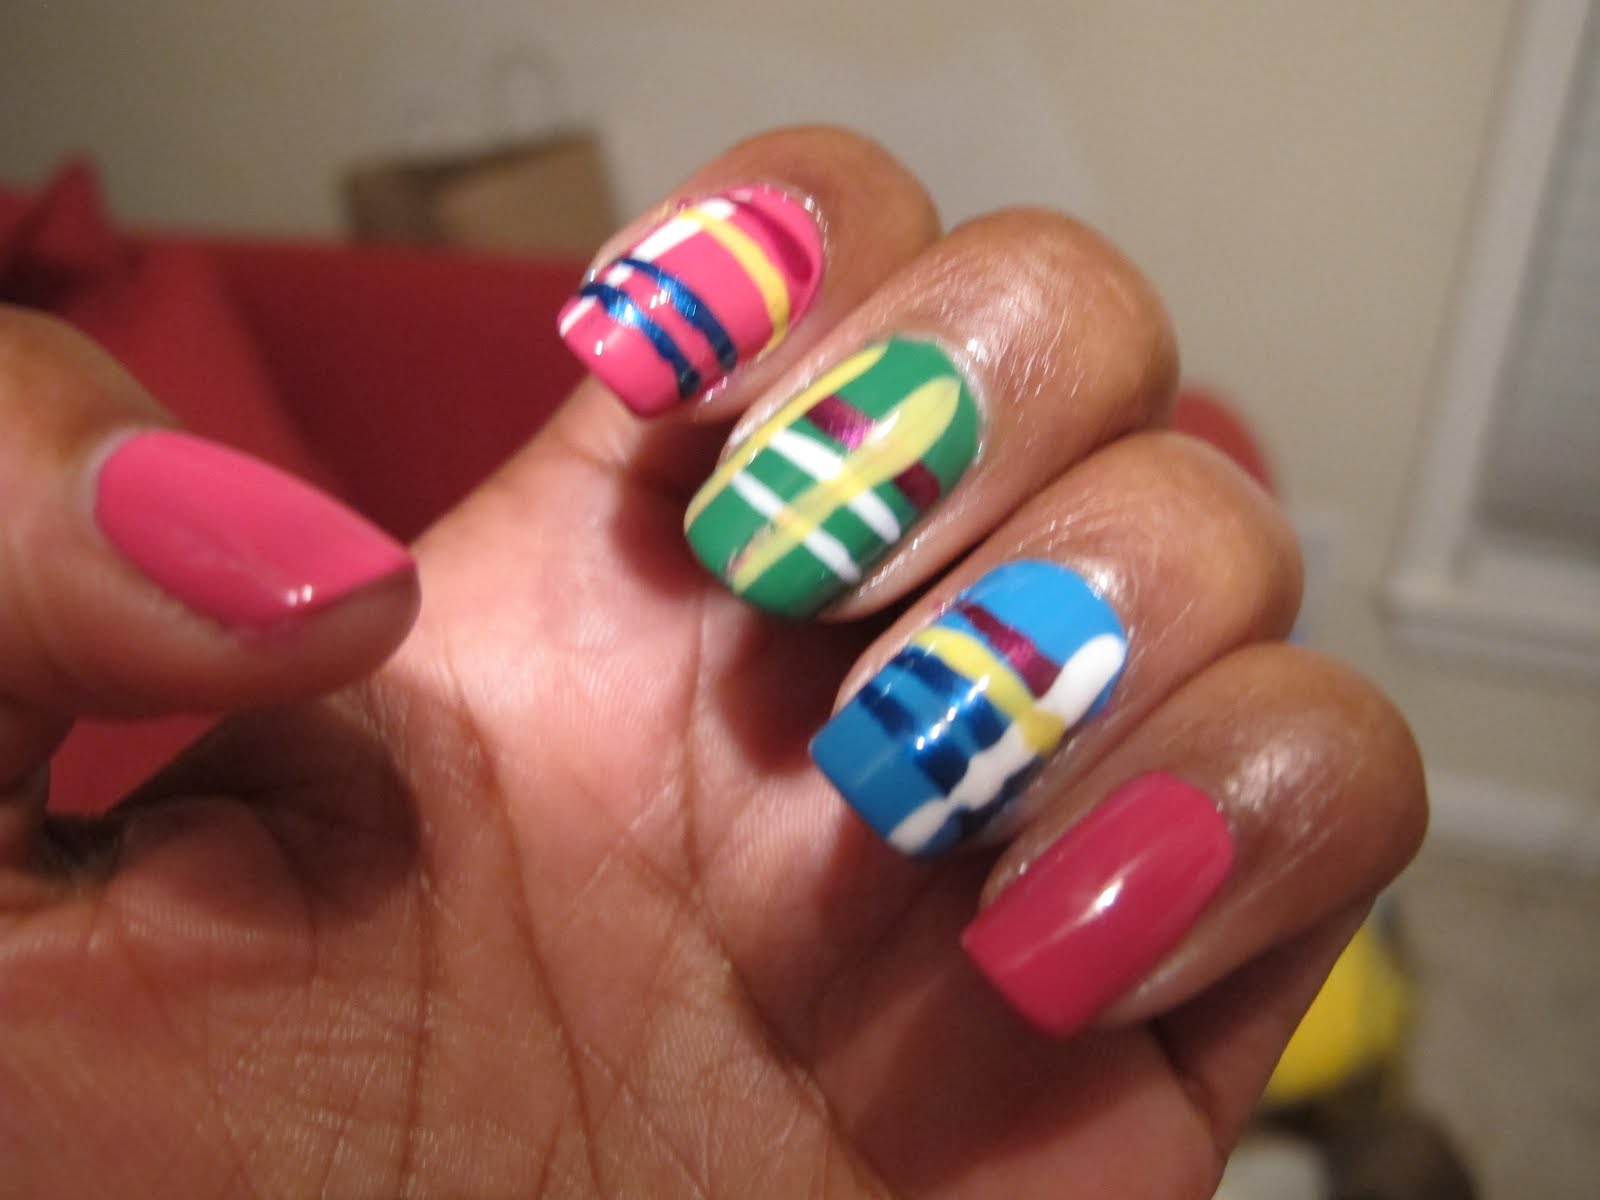 2. Most Recent Nail Designs - wide 8